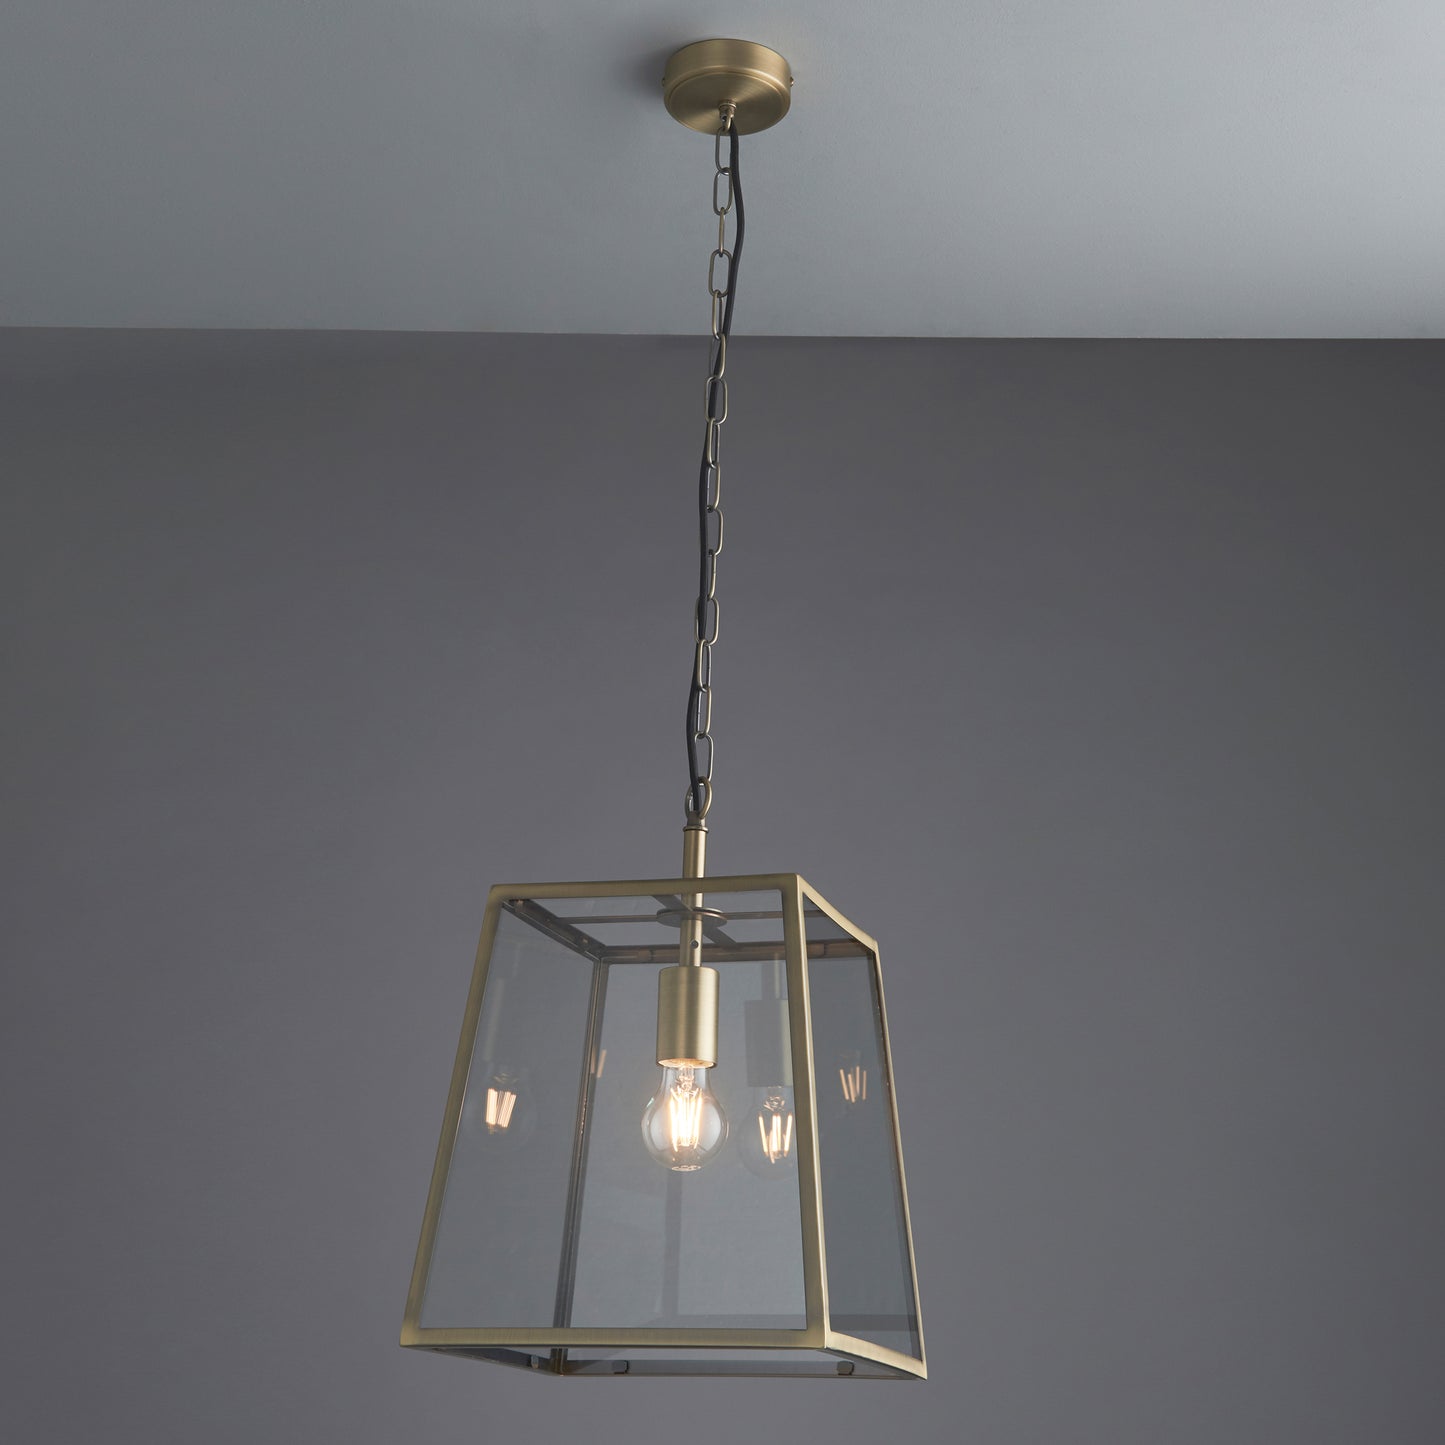 A Hurst Pendant Light Antique Brass from Kikiathome.co.uk with a clear glass shade for home interior decor.